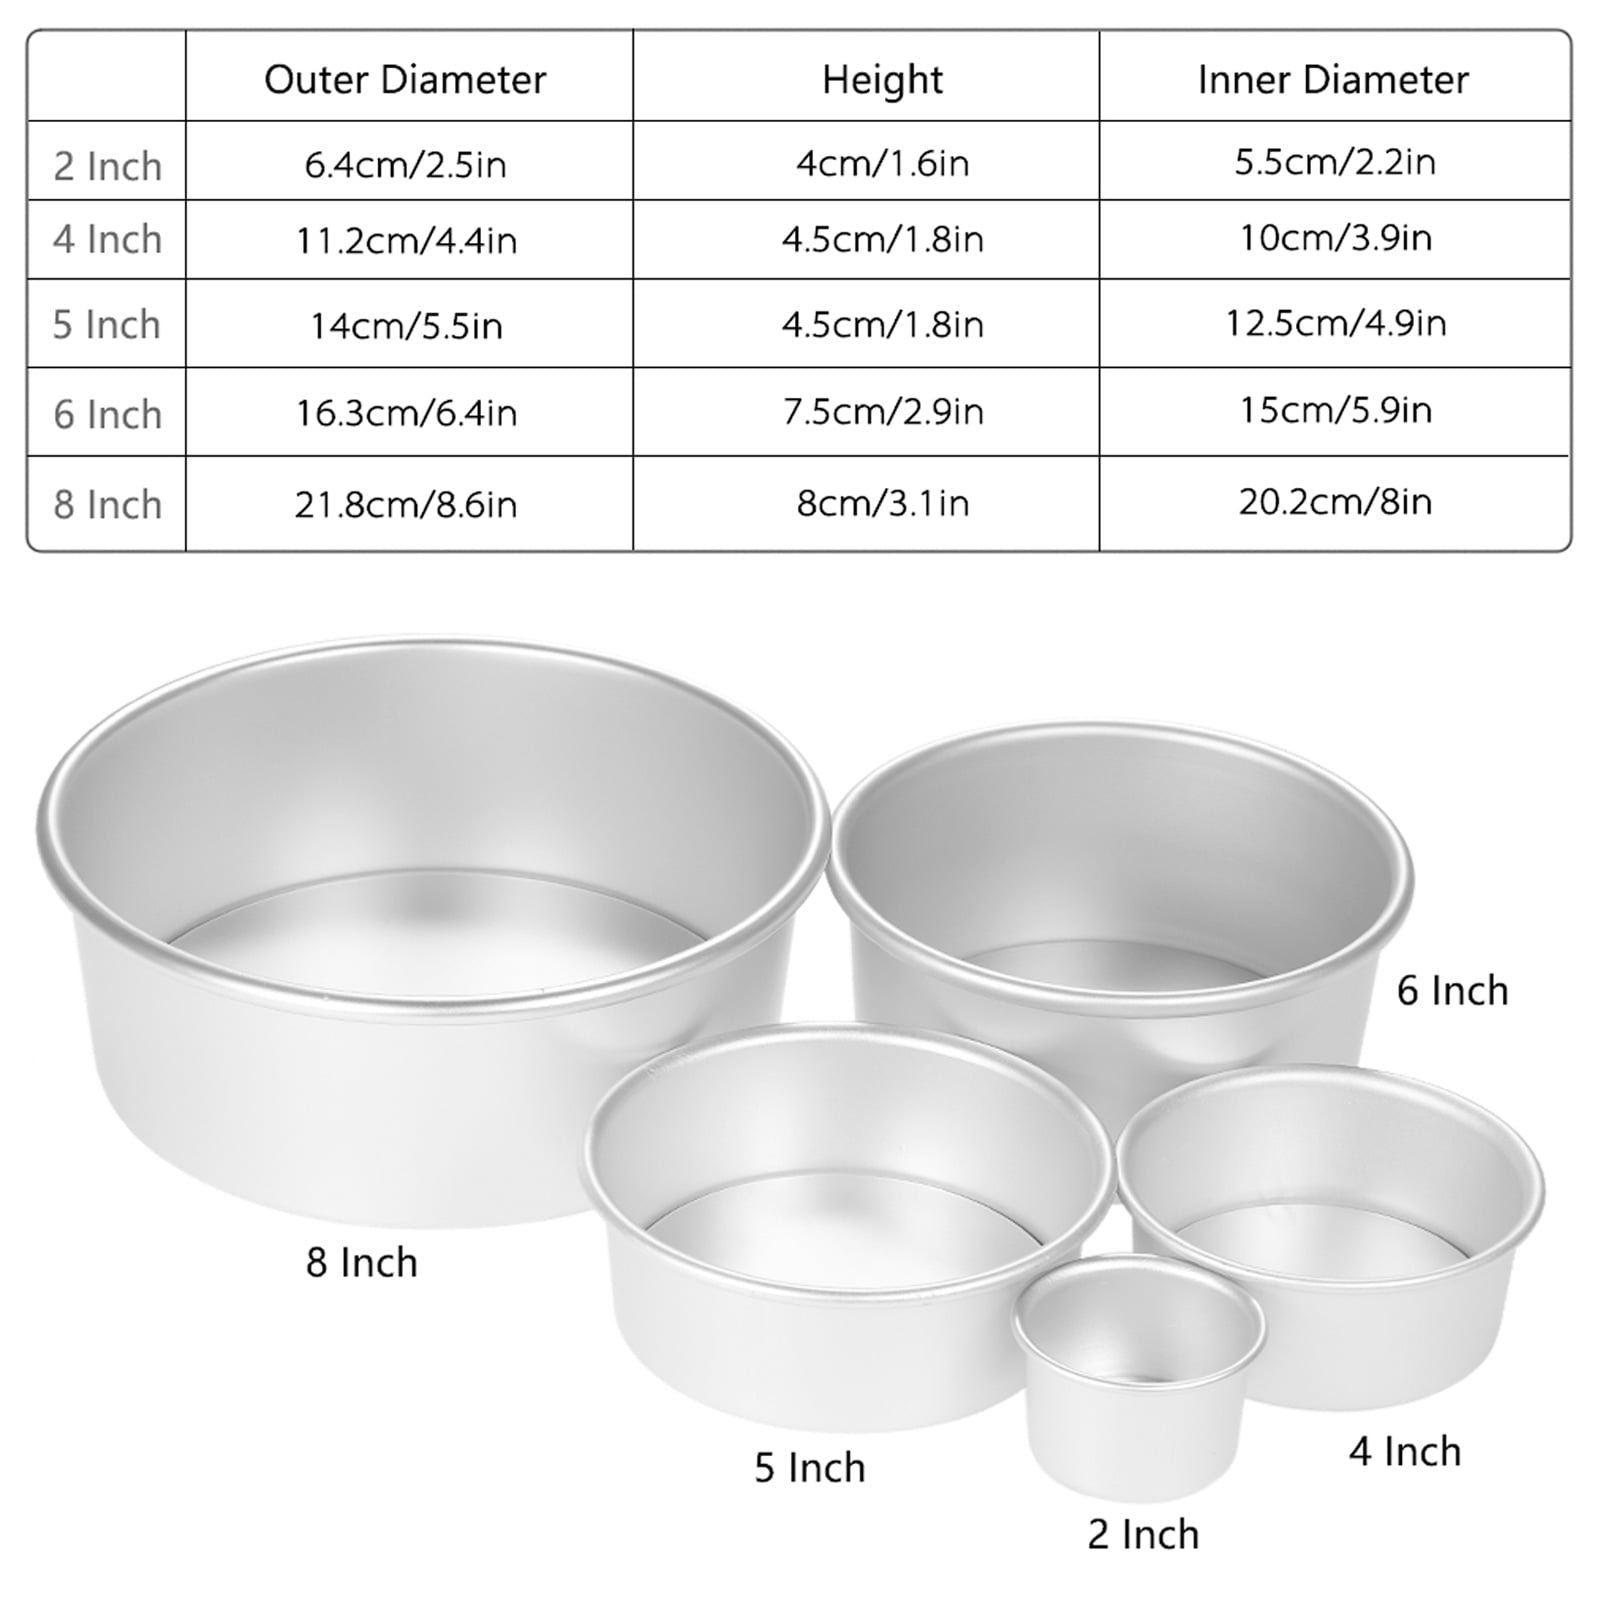 2/4/5/6/8 inch Aluminum Alloy Round Cake Pan Set Cheesecake Mold Mould W6N0 